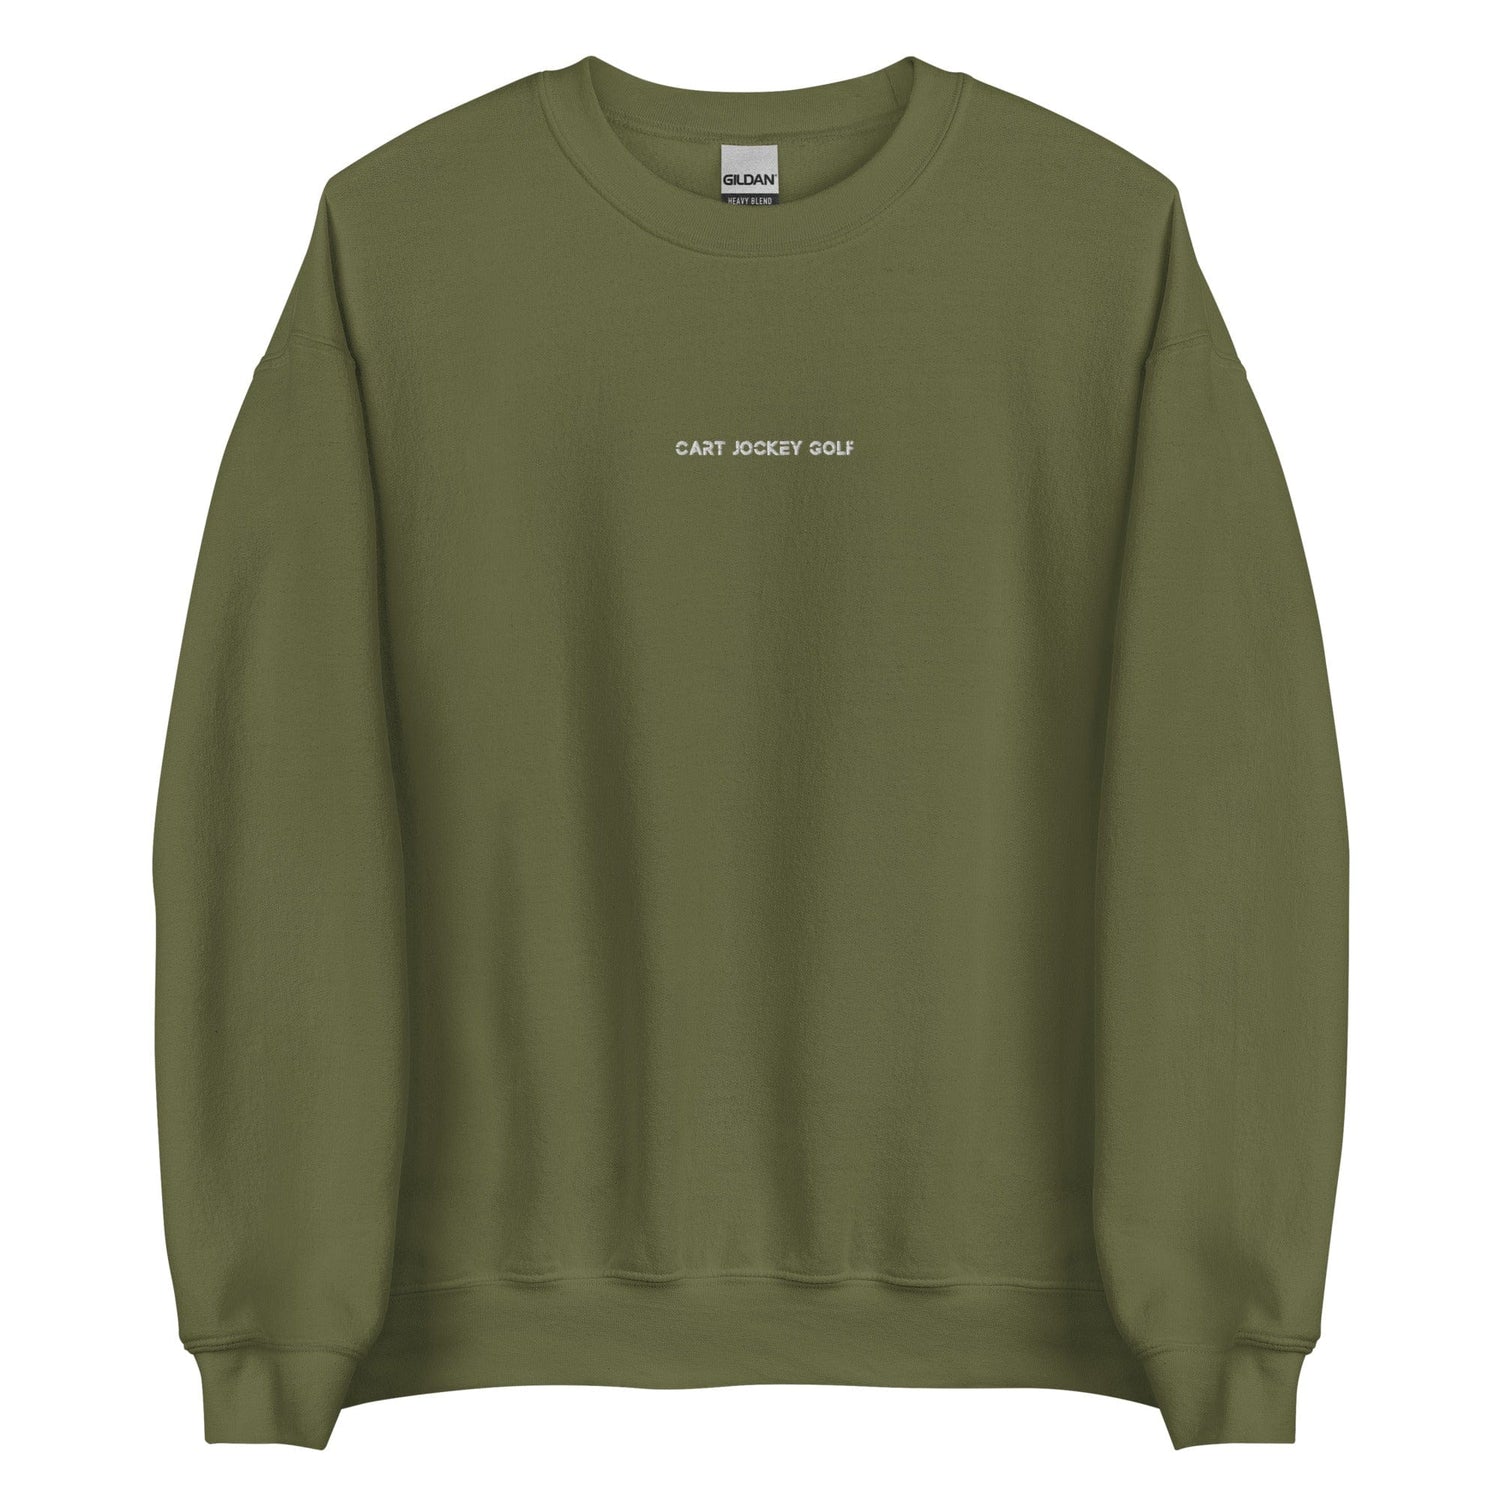 a green Simple Embroidered Crewneck sweatshirt with the words 'don't let go' on it by Cart Jockey Golf.